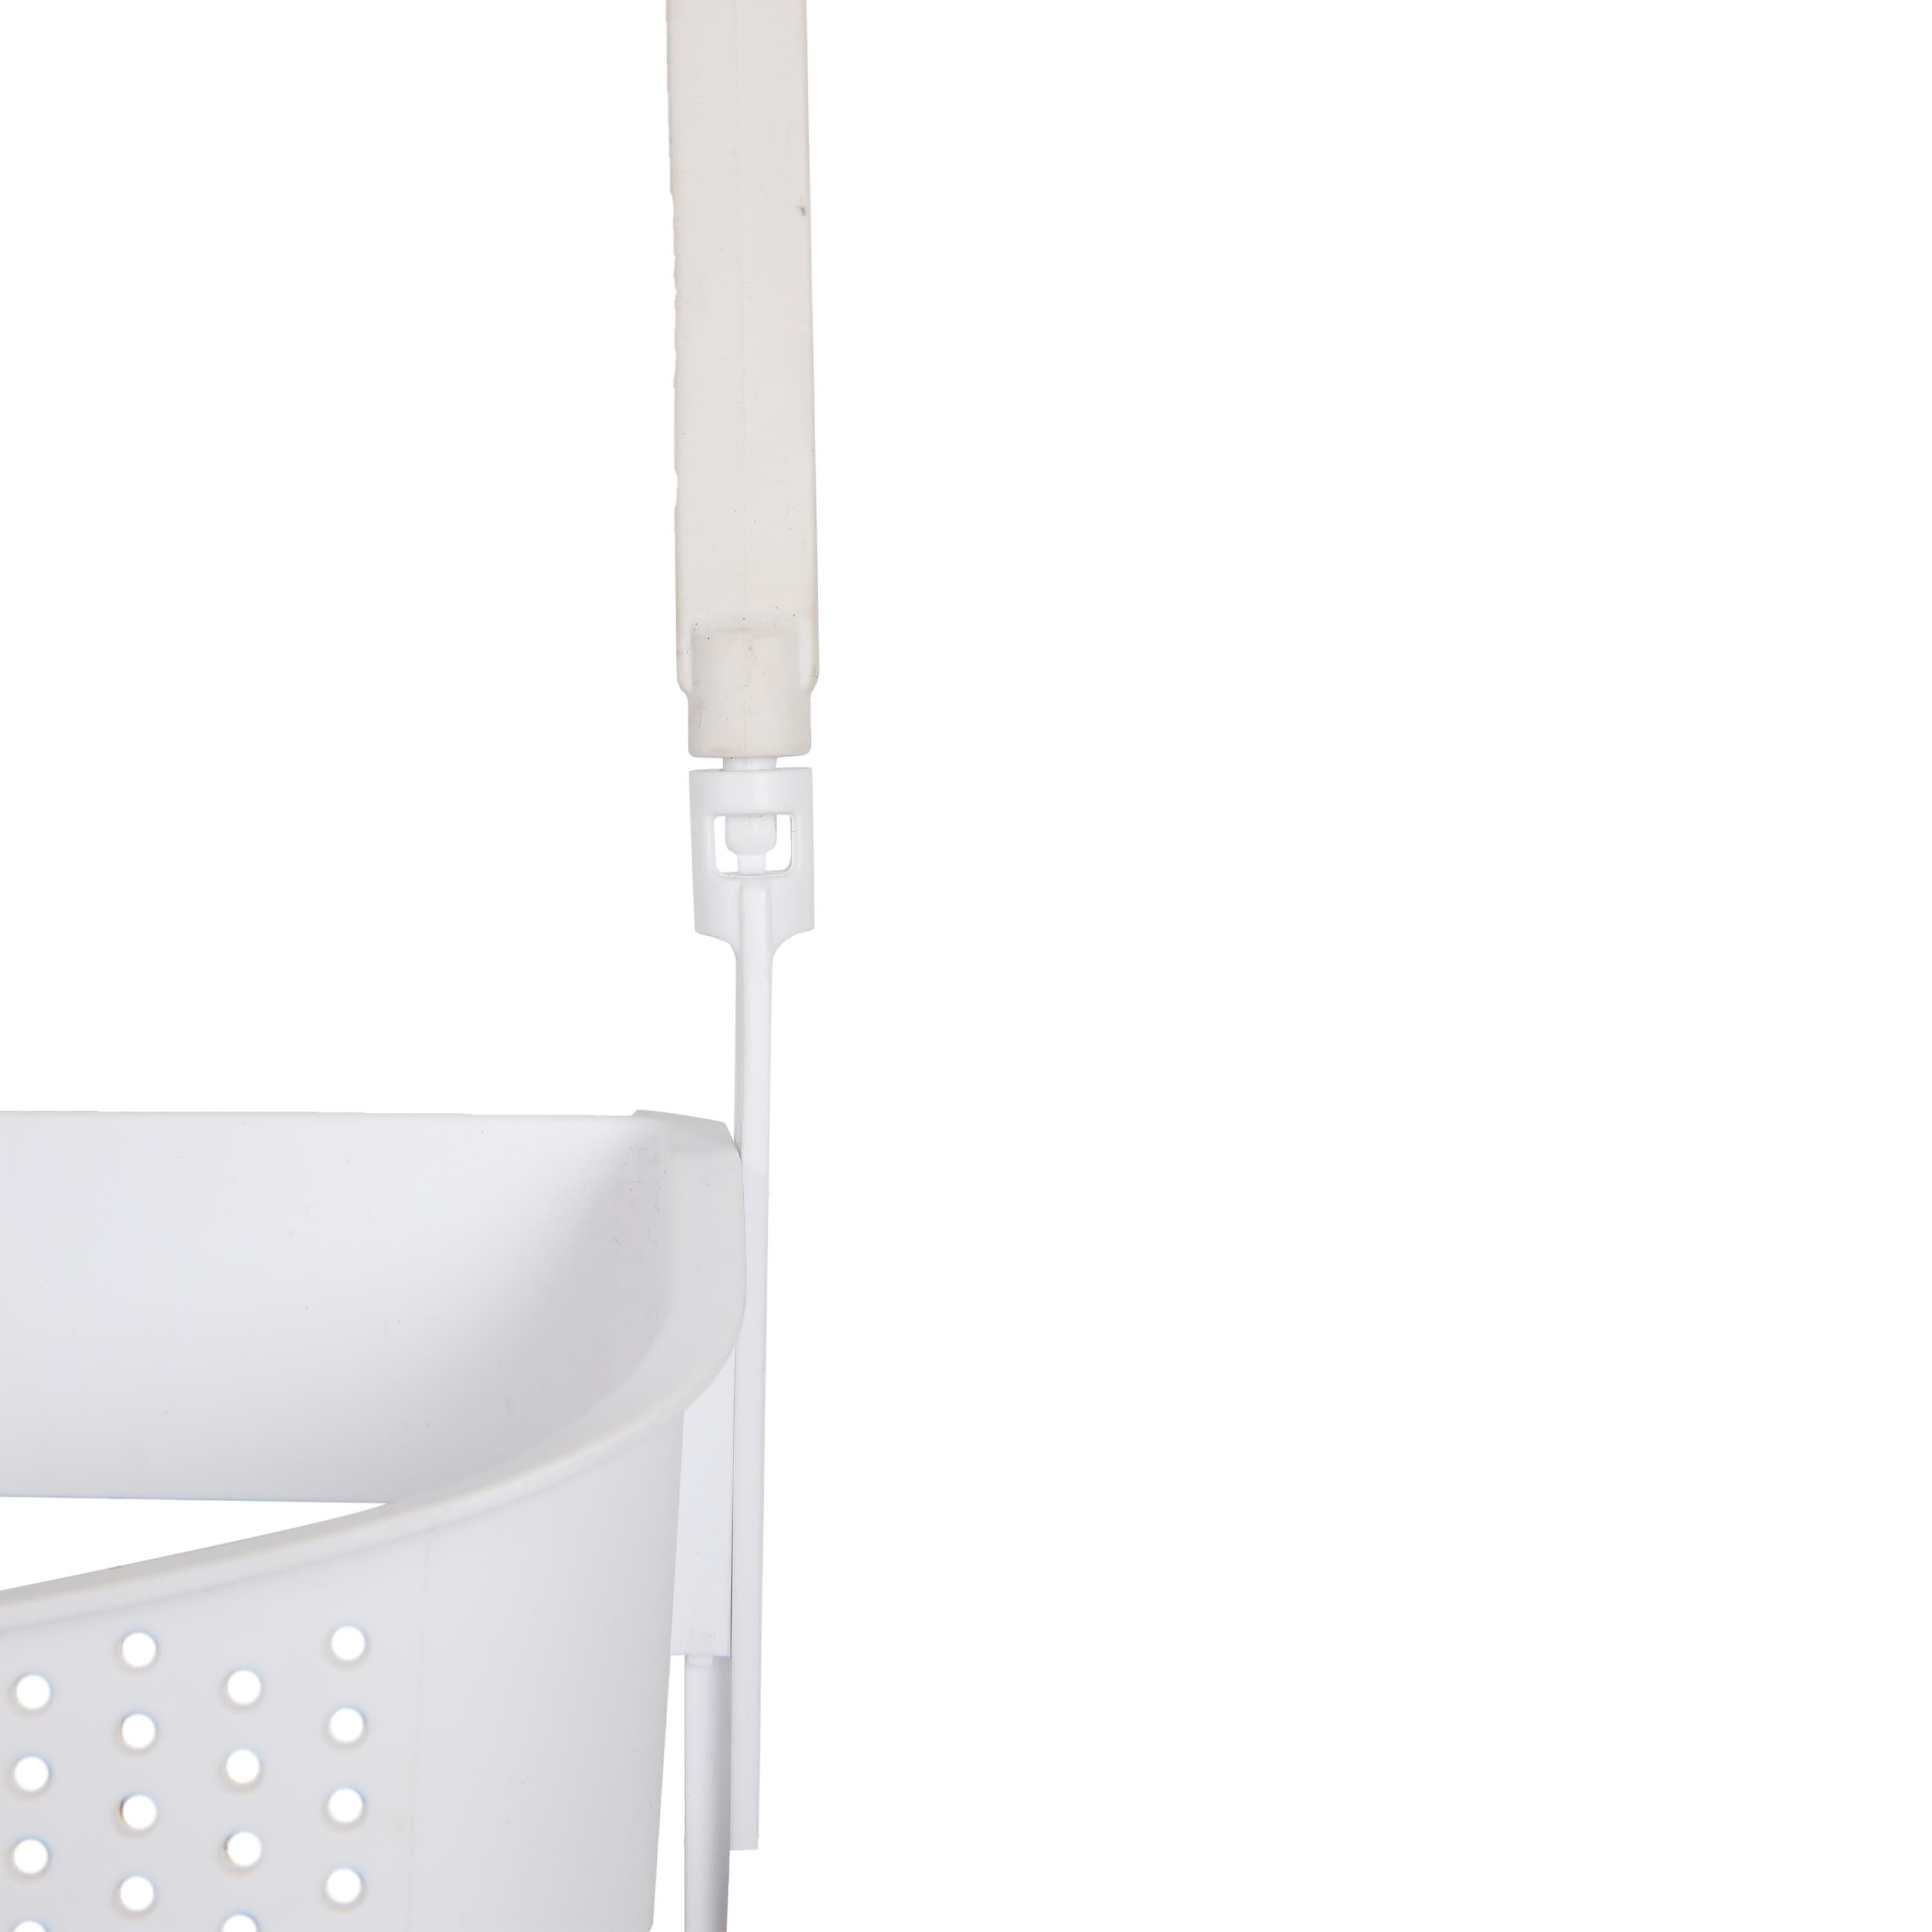 Hawley 2 Way Convertible Shower Caddy Rebrilliant Finish: White